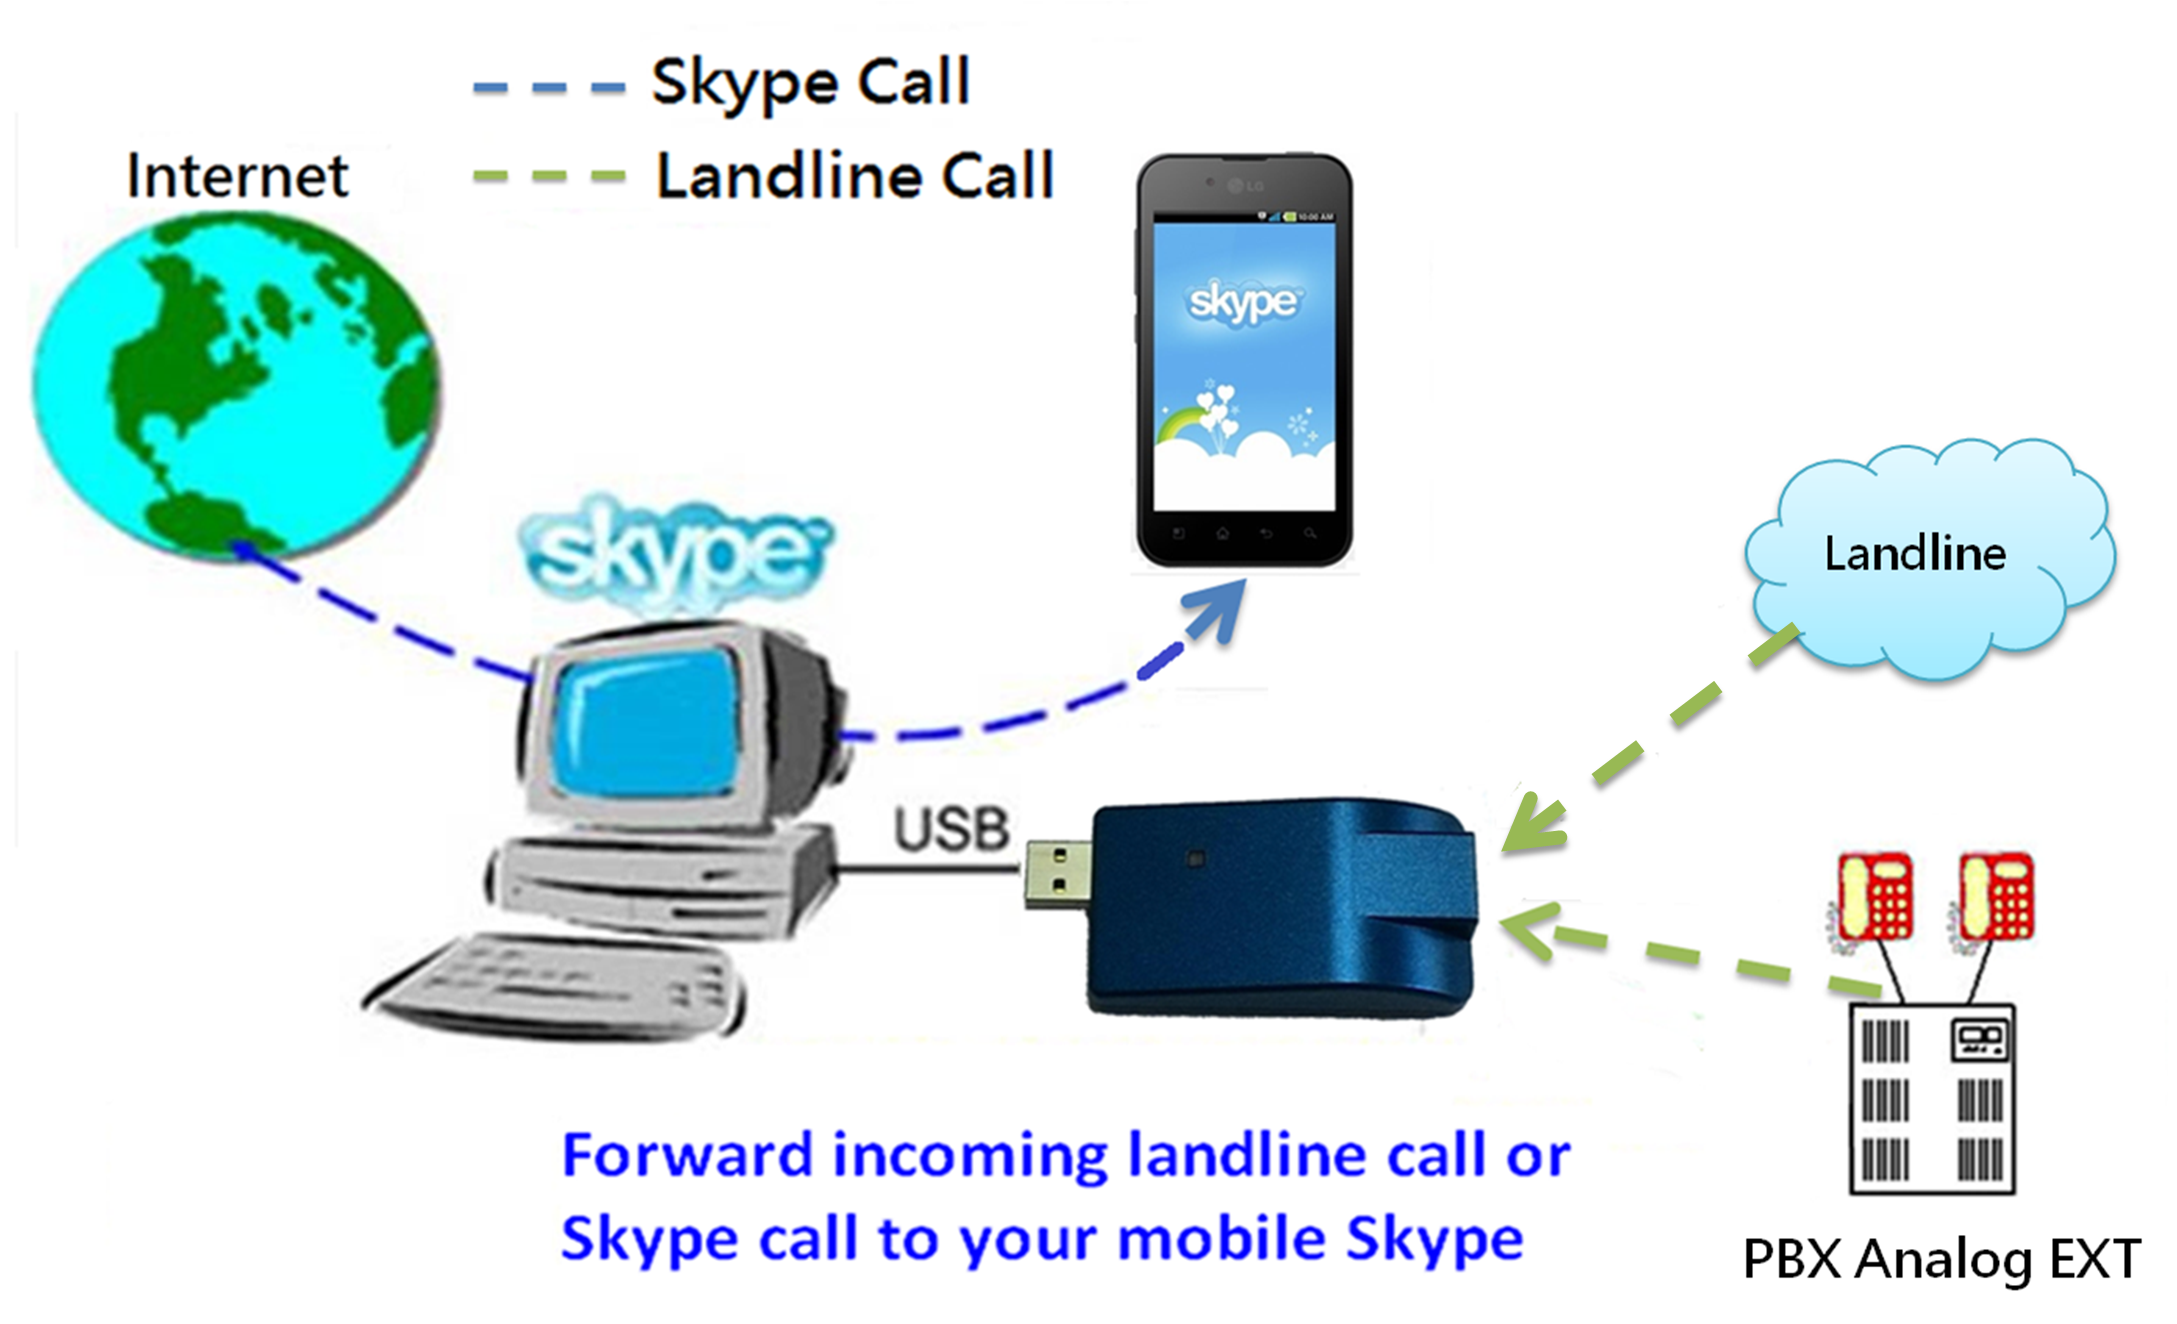 M-office incoming landline calls forwarded to mobile phone Skype